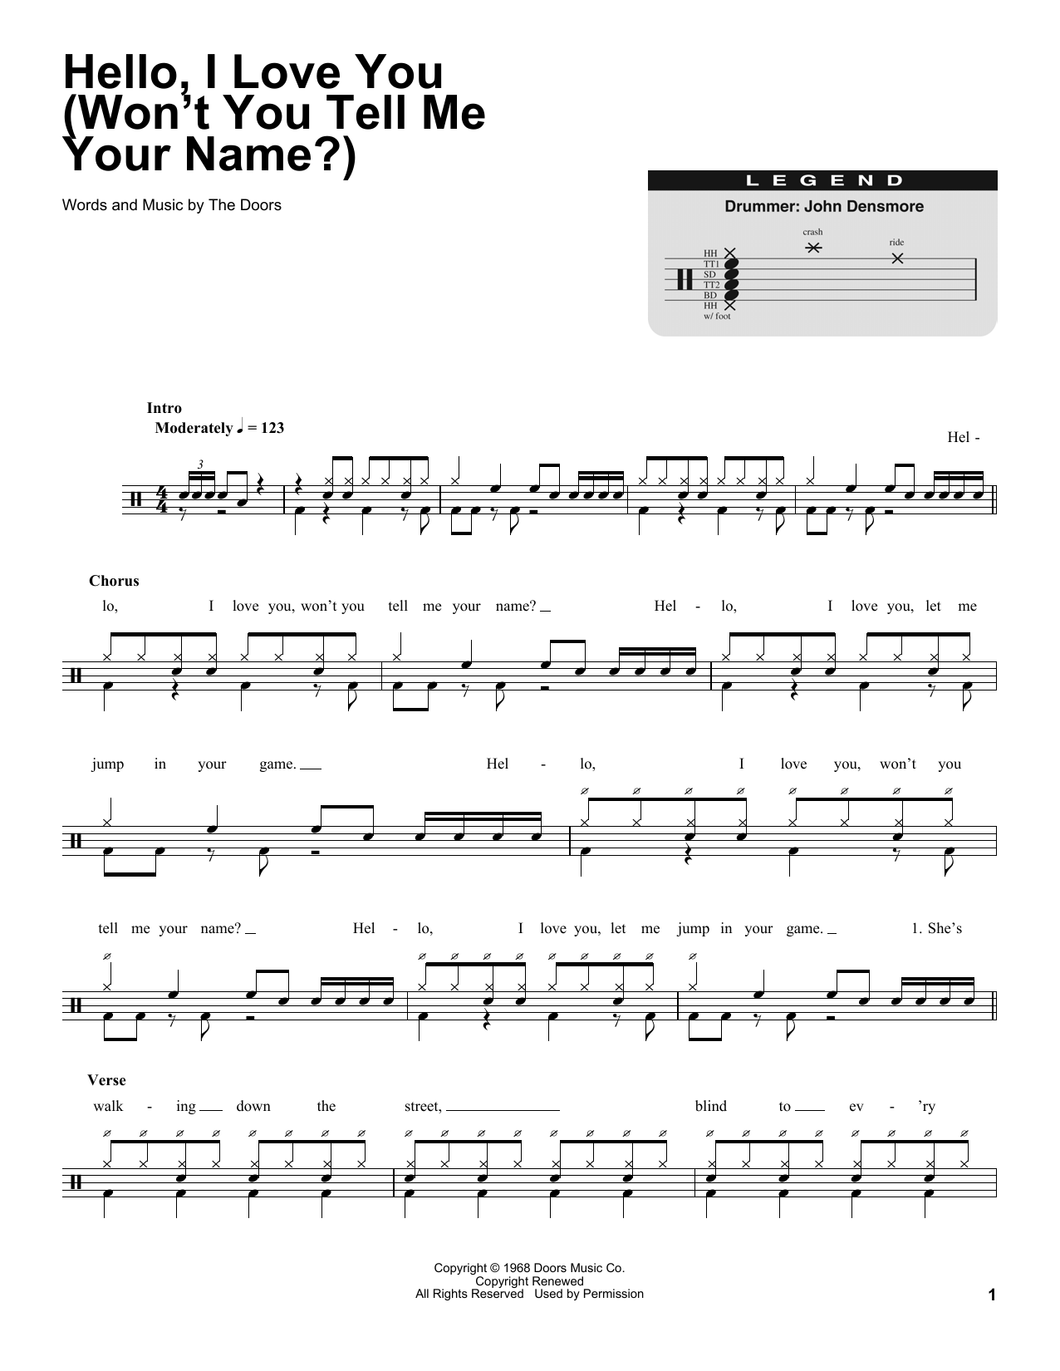 Hello, I Love You (Won't You Tell Me Your Name?) - The Doors - Full Drum Transcription / Drum Sheet Music - SheetMusicDirect DT